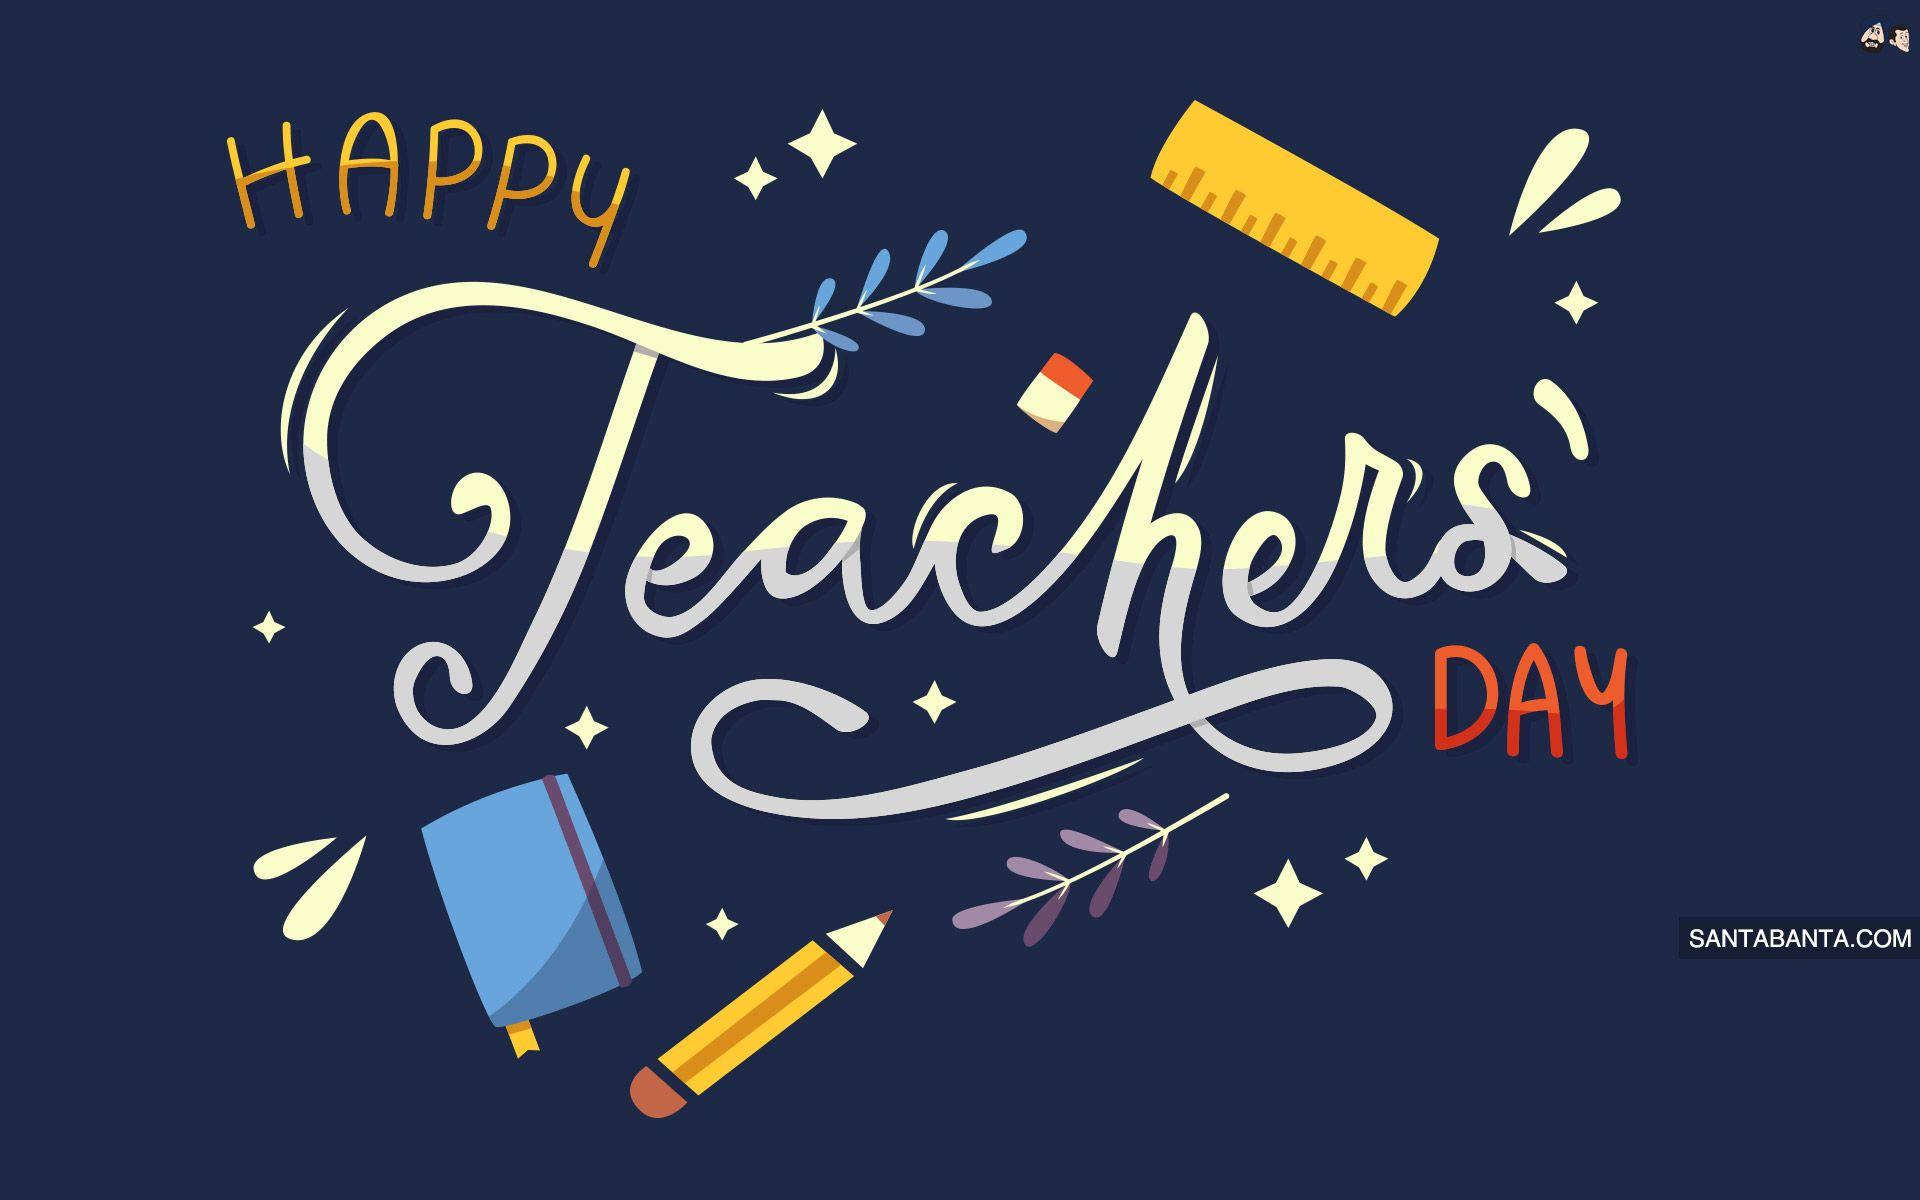 Happy Teachers' Day Occasion Background